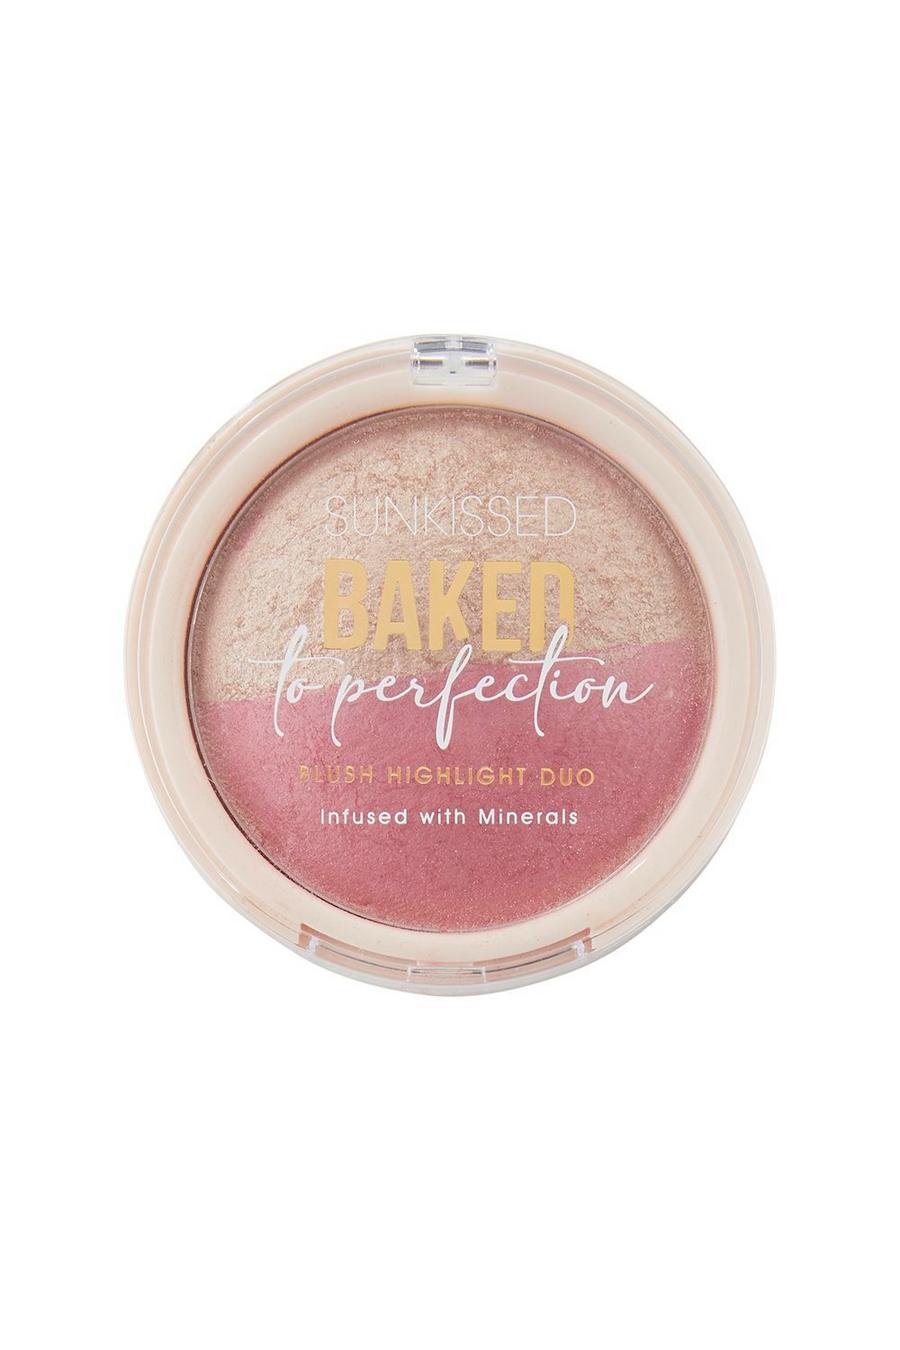 Pink rose Sunkissed Baked To Perfection Blush & Highlighter